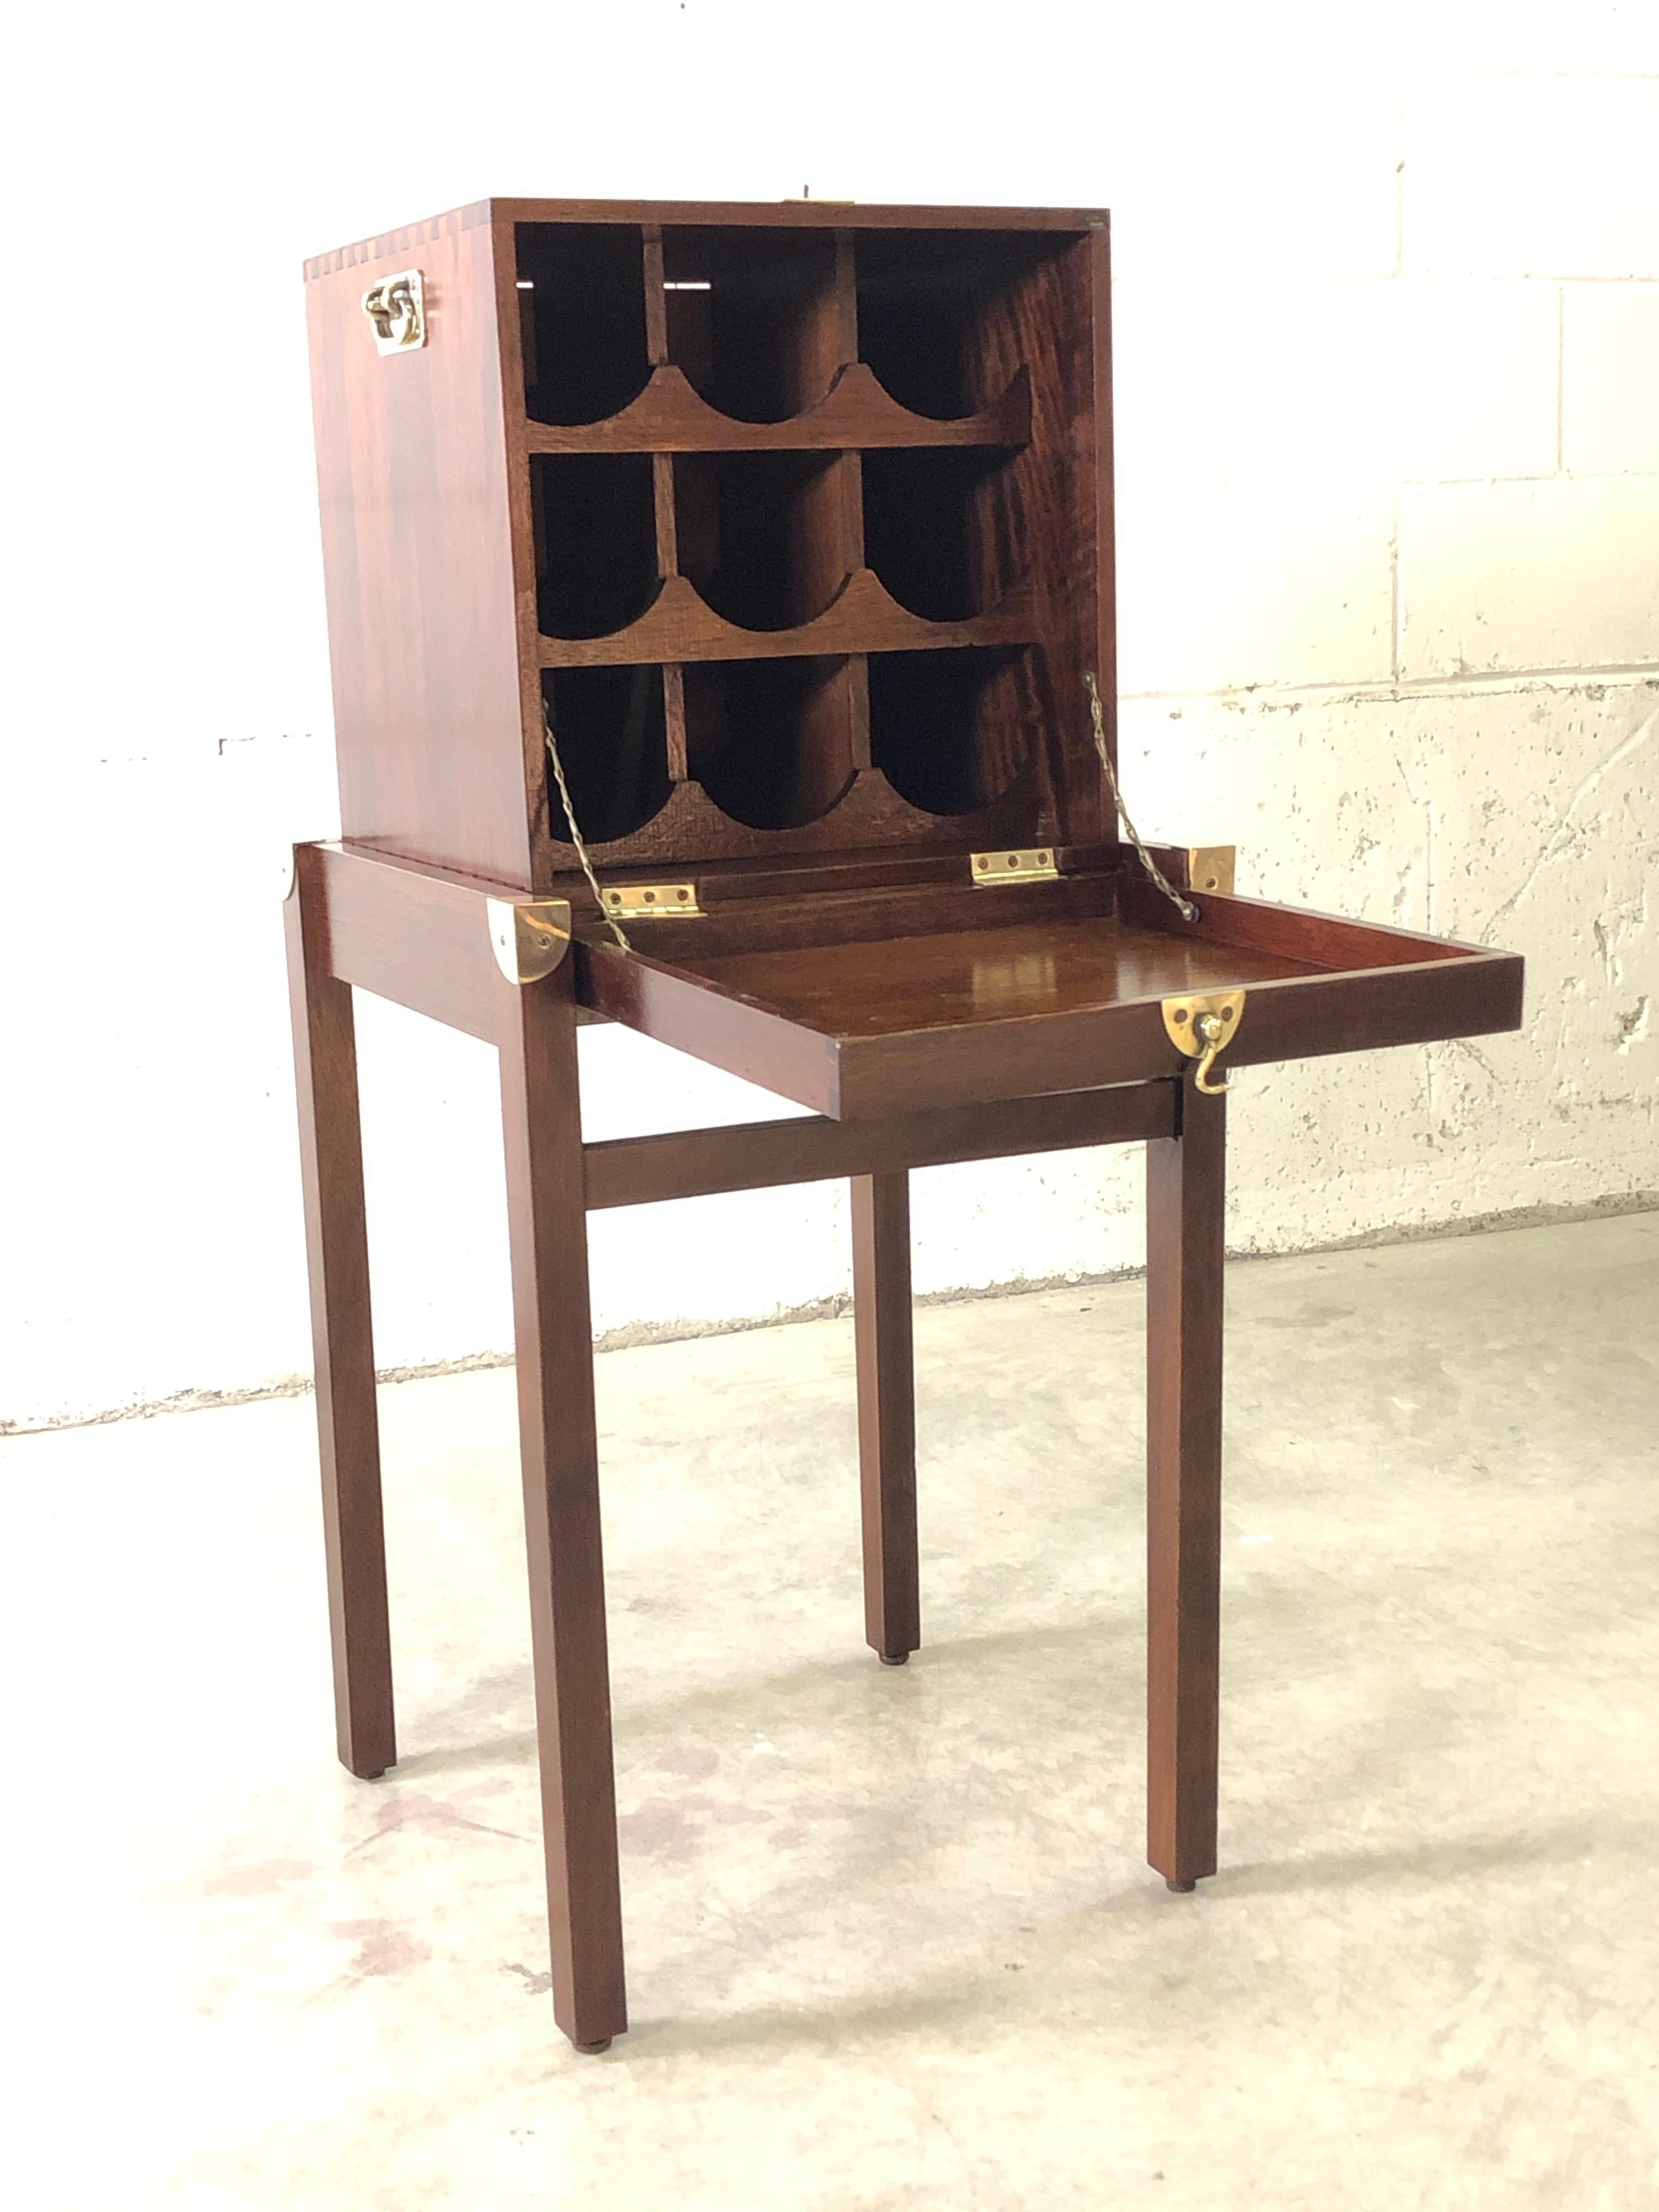 Vintage mahogany wood wine rack on a stand. The rack has a dovetailed box with brass accents and sits on a stand. The rack holds nine wine bottles and the front comes down to create a shelf. Excellent condition. No marks.